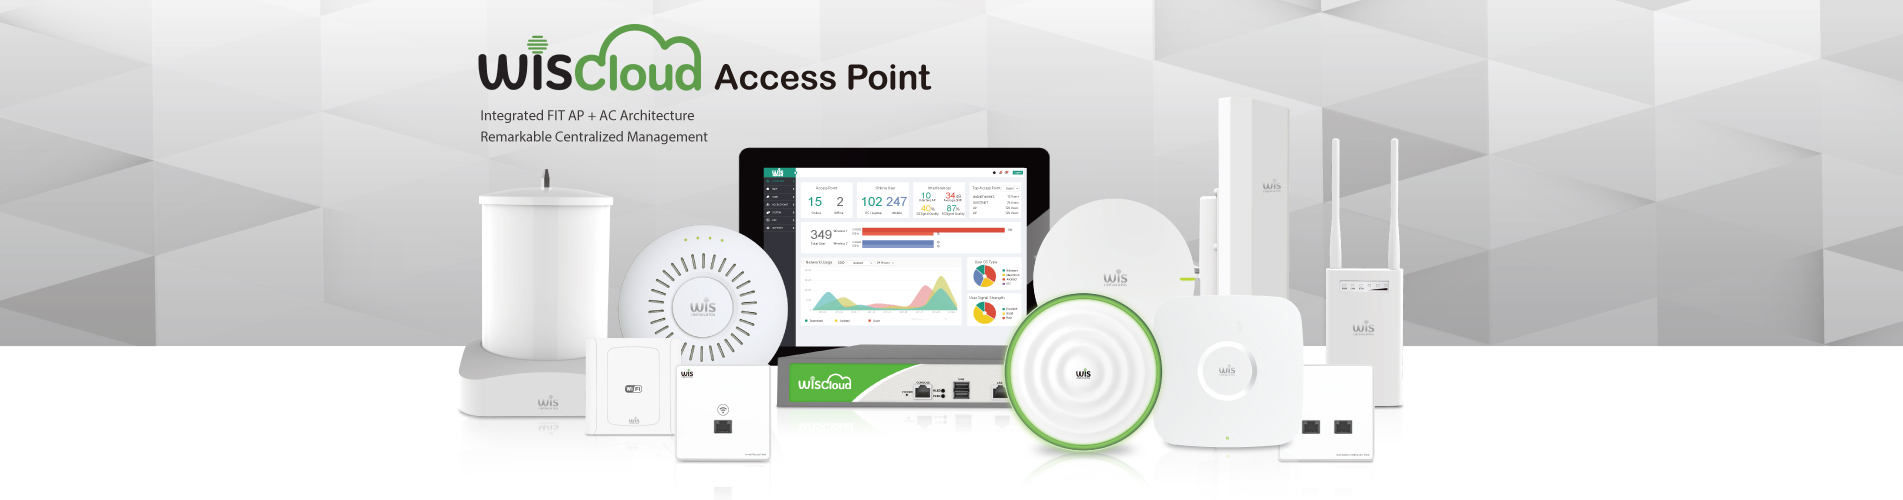 2019 Wis Cloud Access Point 